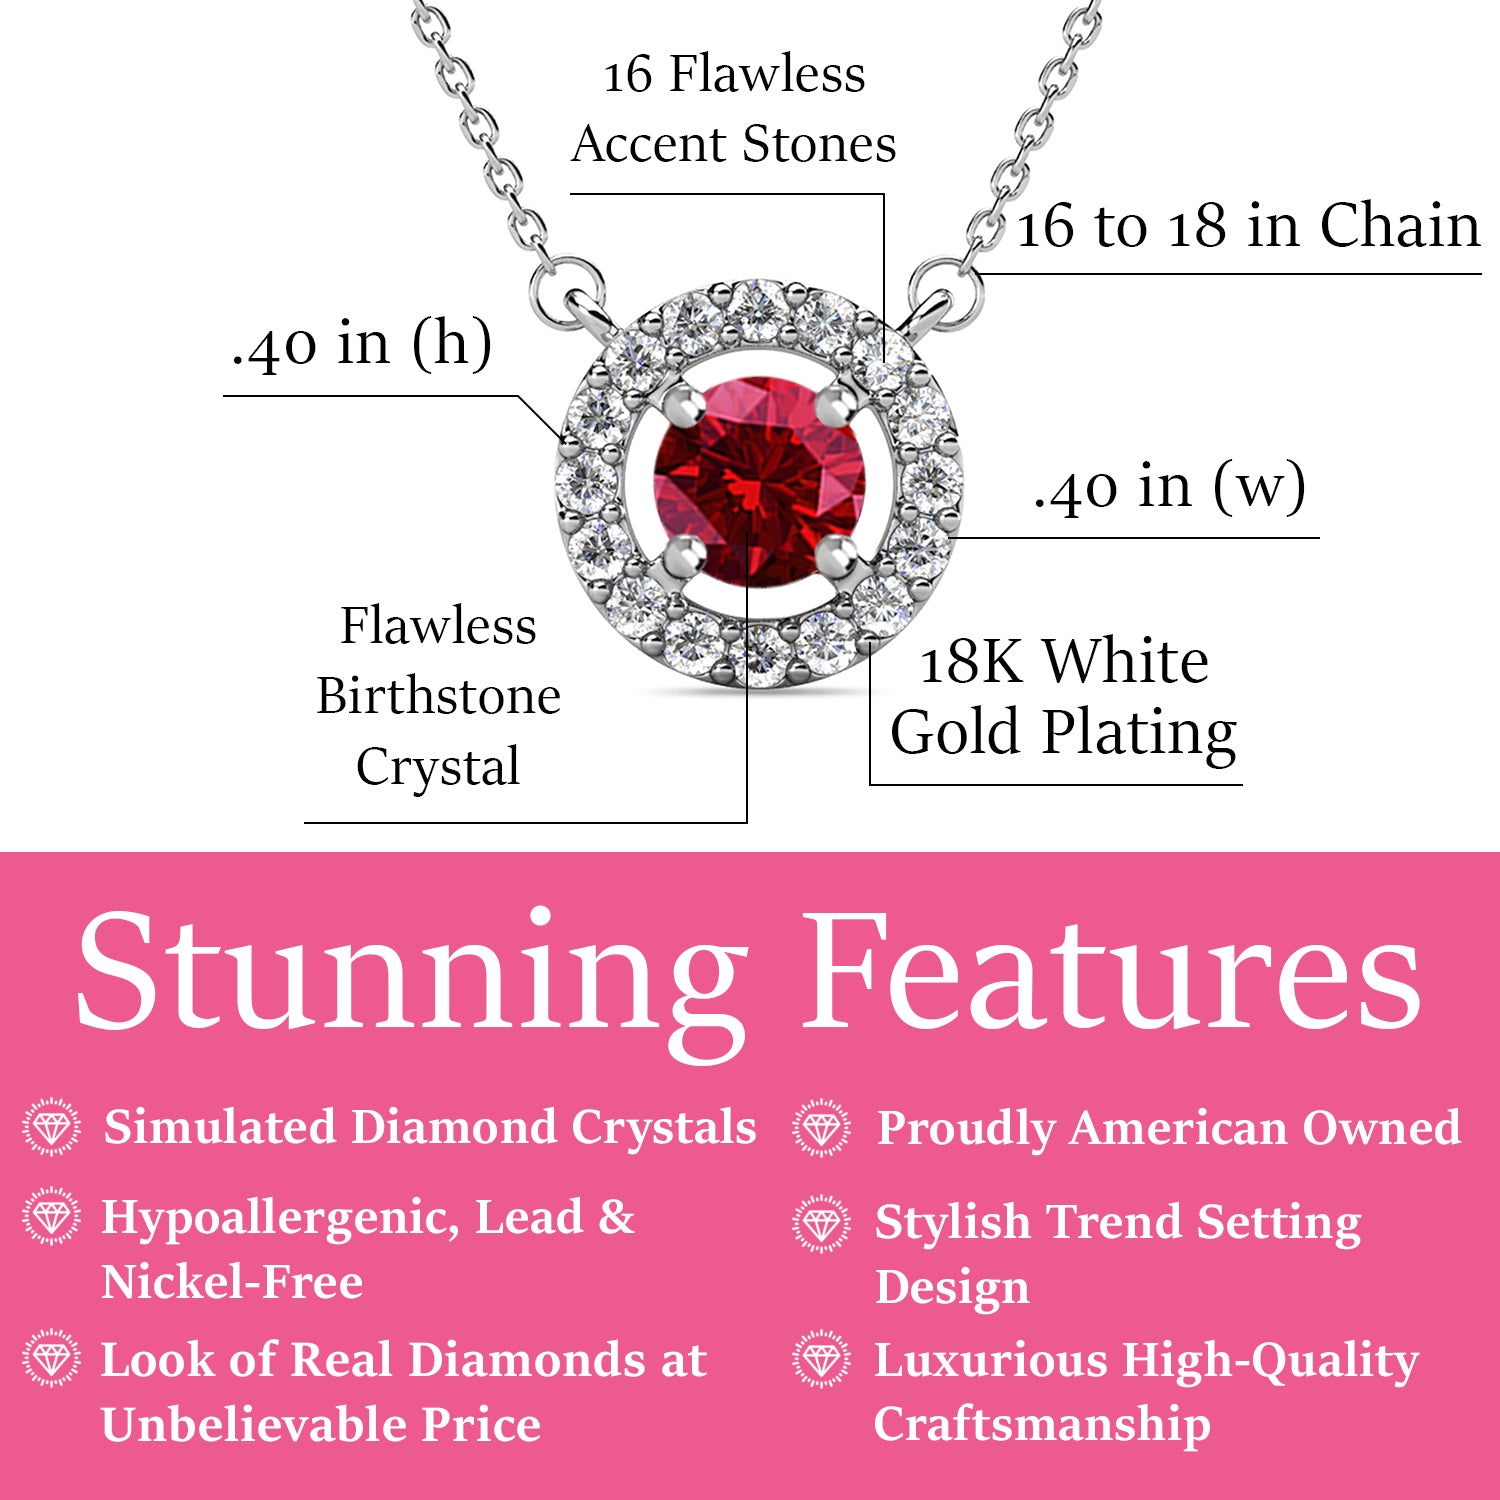 Royal January Birthstone Garnet Necklace, 18k White Gold Plated Silver Halo Necklace with Round Cut Crystal